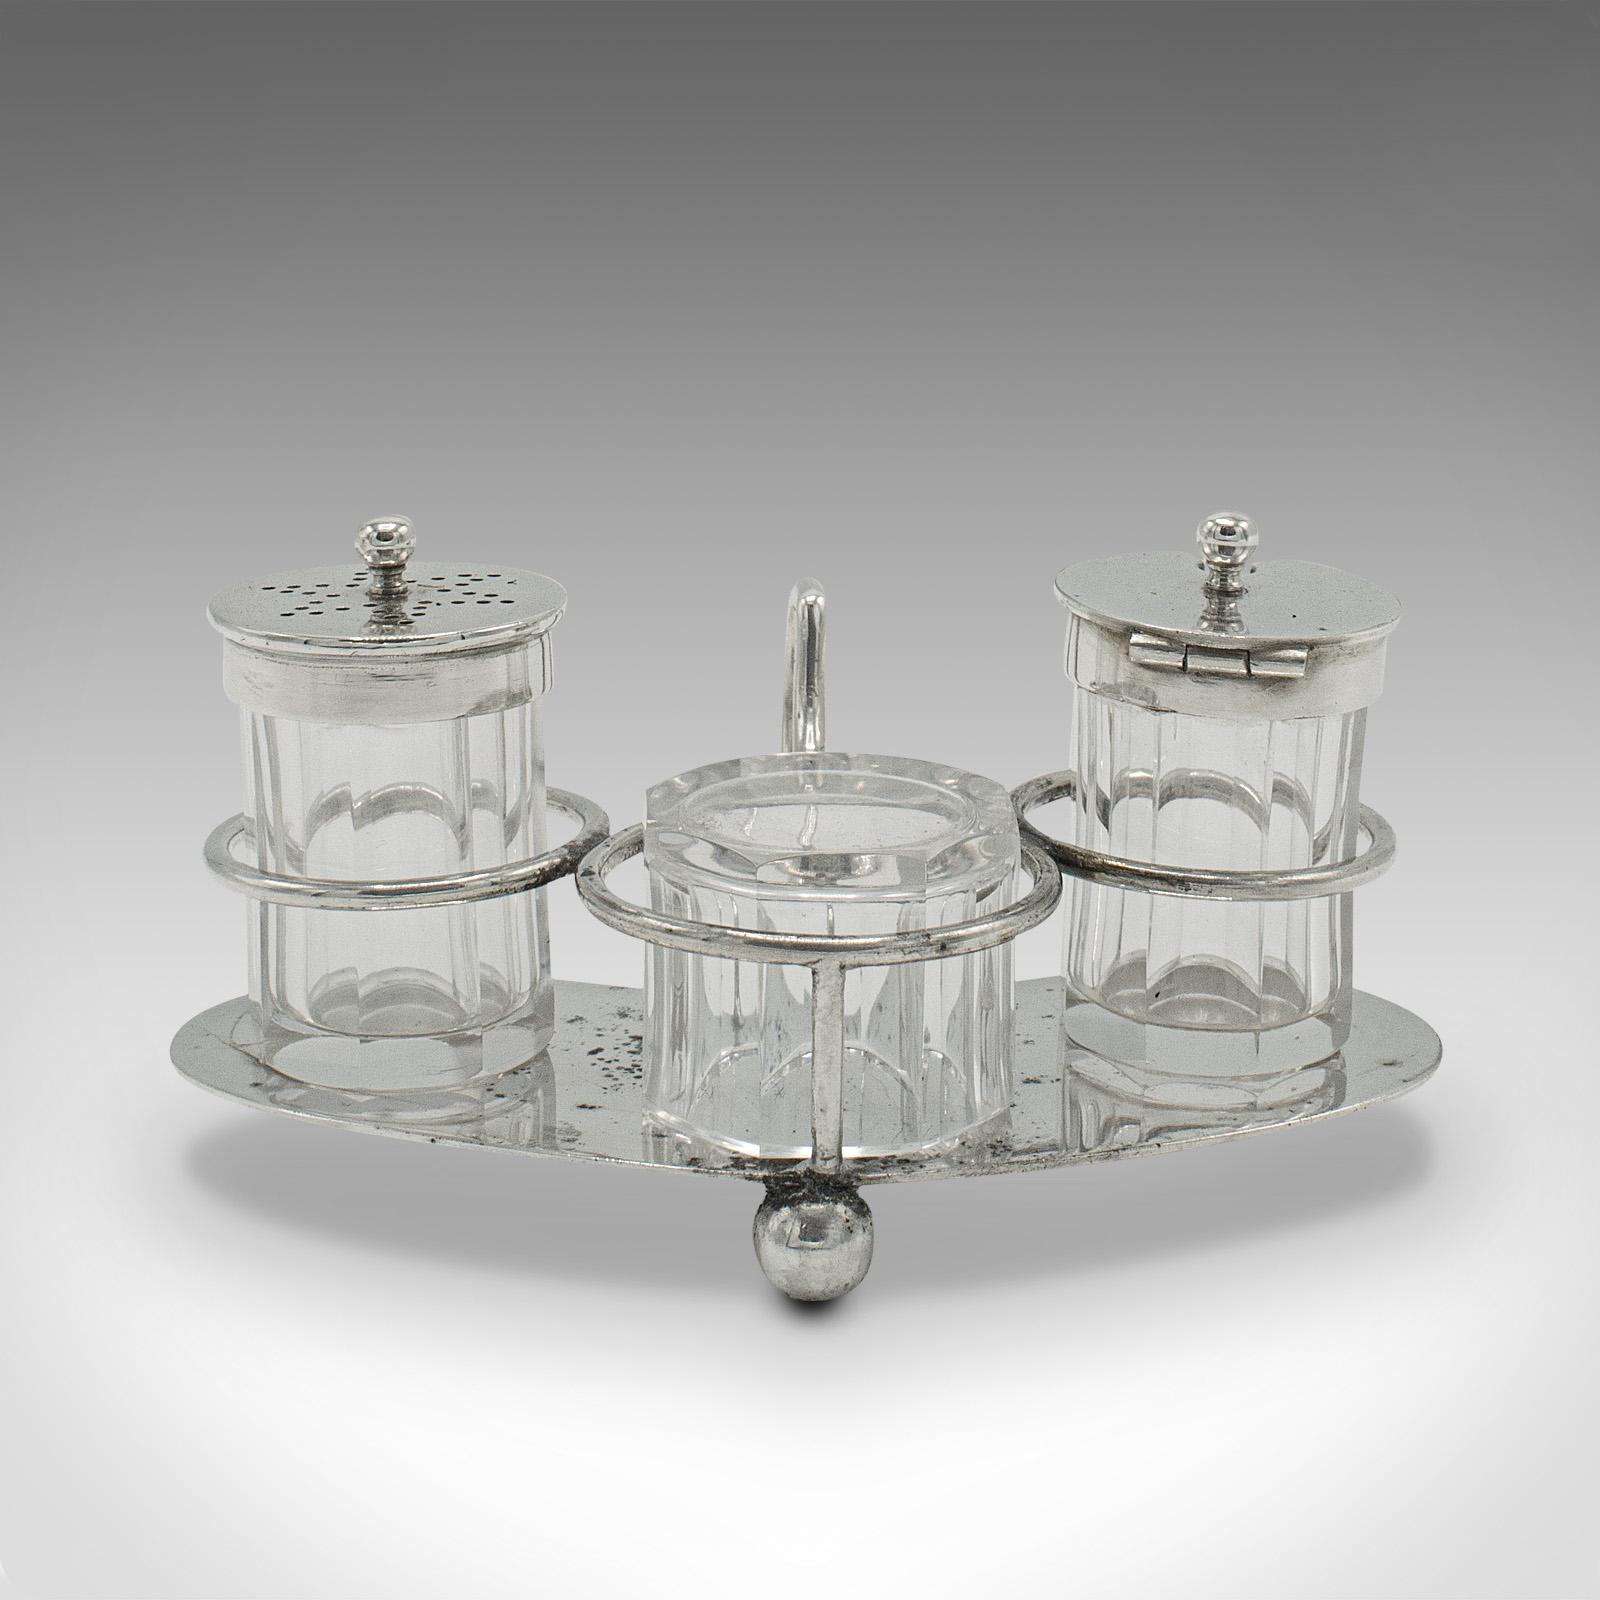 This is a cased set of antique cruets. An English, silver plate canteen of four condiment stands, dating to the Edwardian period, circa 1910.

Delightful tableware presented within an attractive case
Displays a desirable aged patina - some light